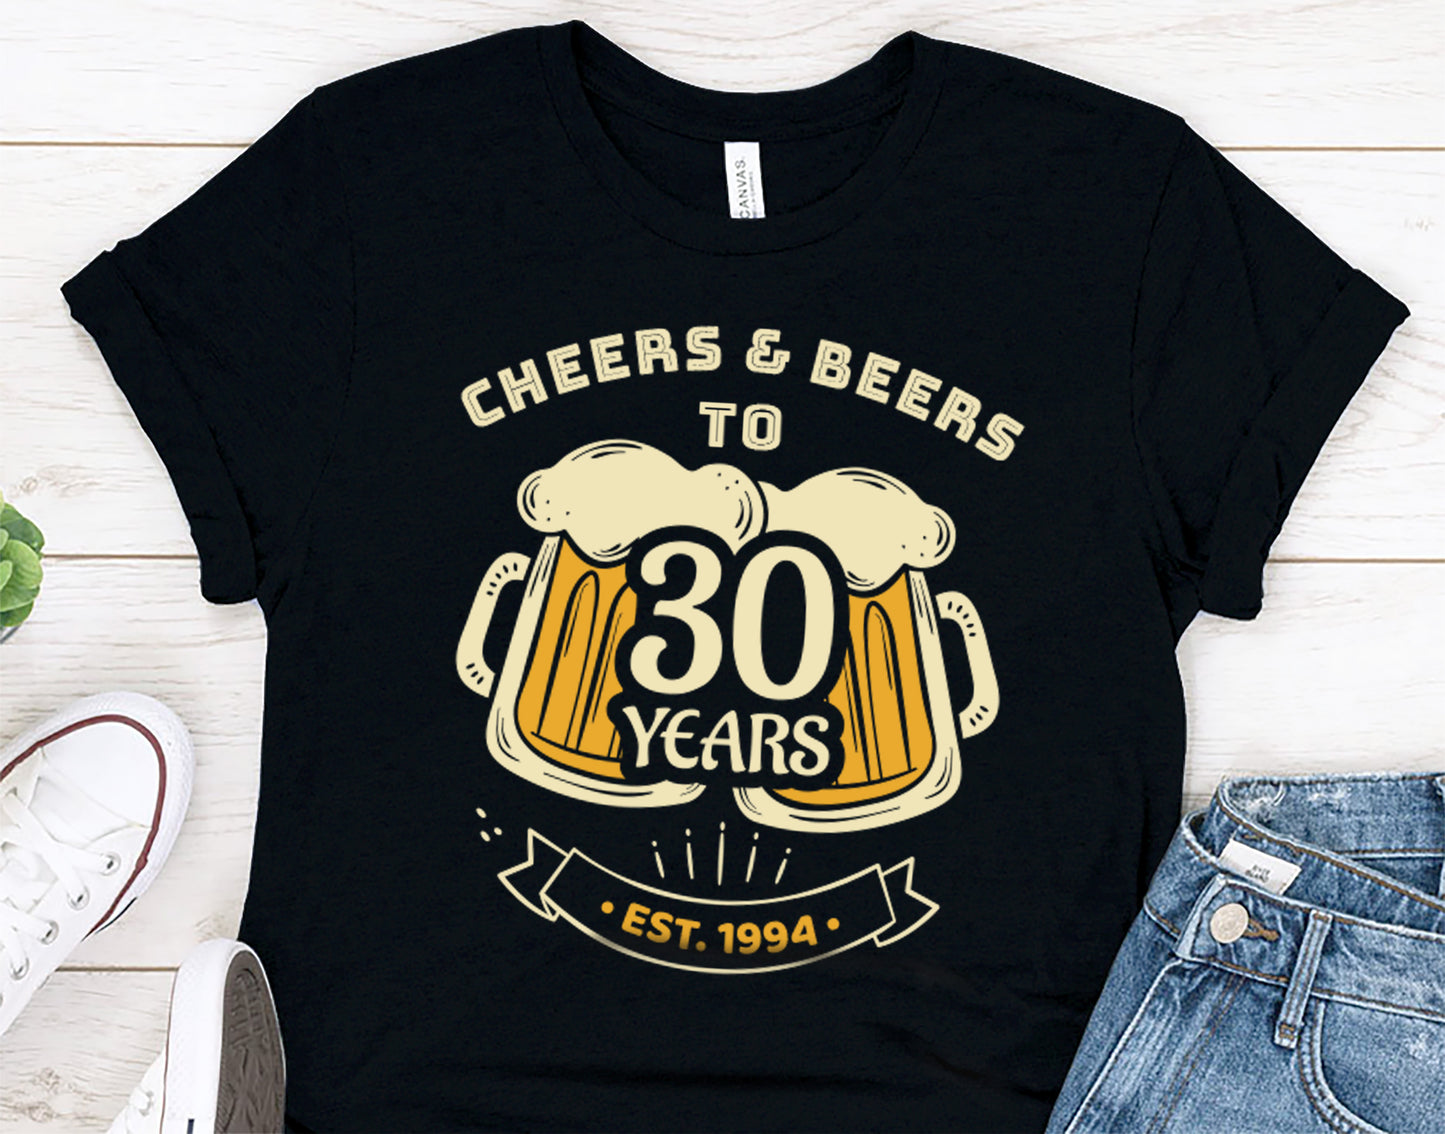 Cheers and Beers to 30 Years, 30th Birthday Gift Shirt for Men or Women